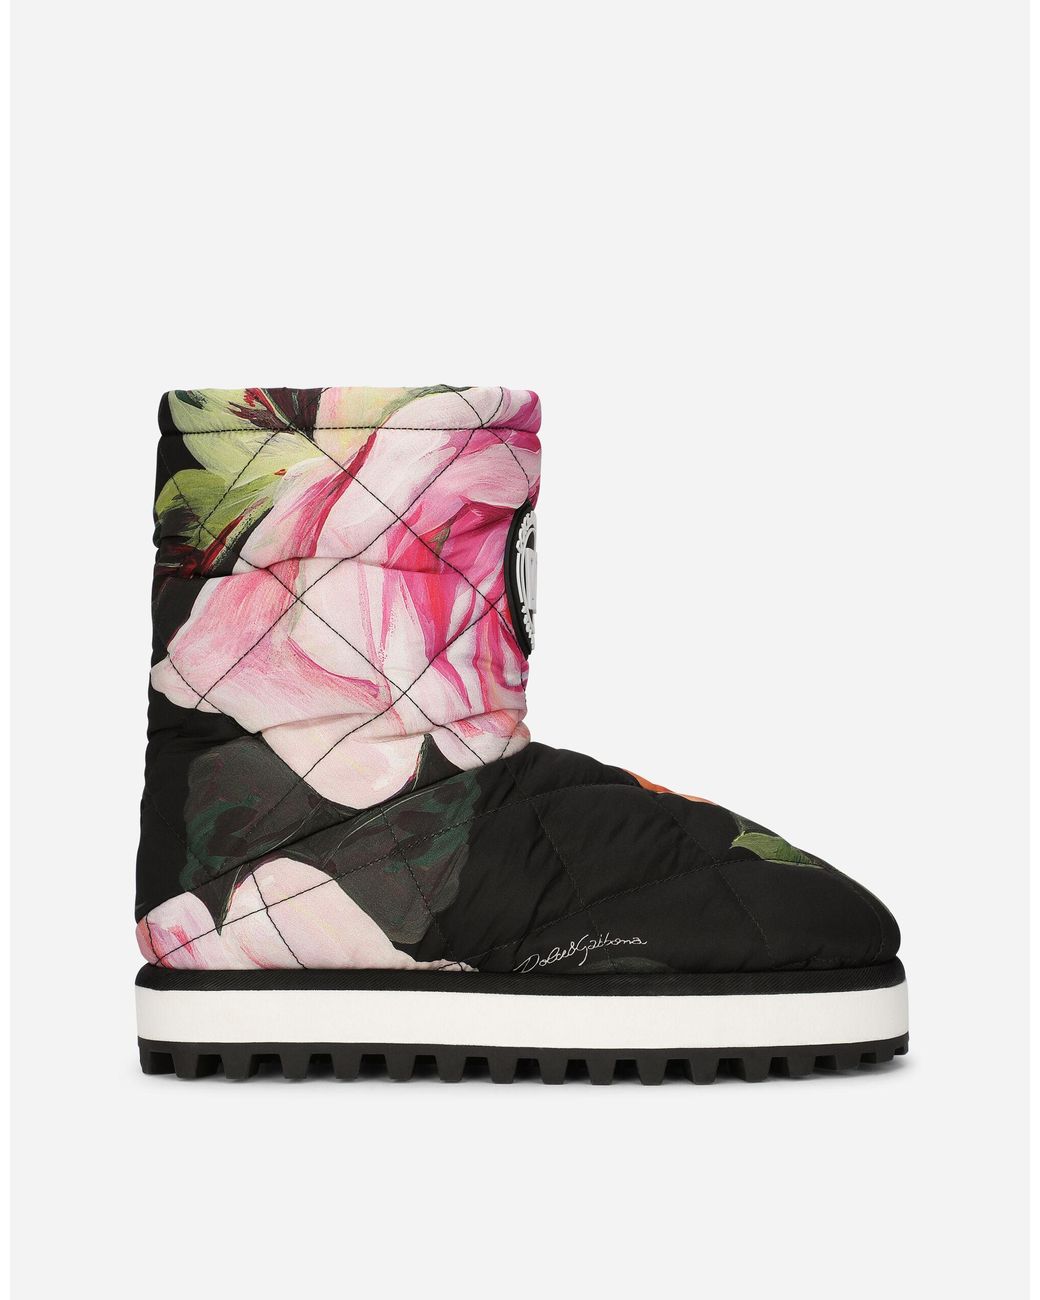 Dolce & Gabbana Nylon Ankle Boots With Rose Print in Pink | Lyst Australia